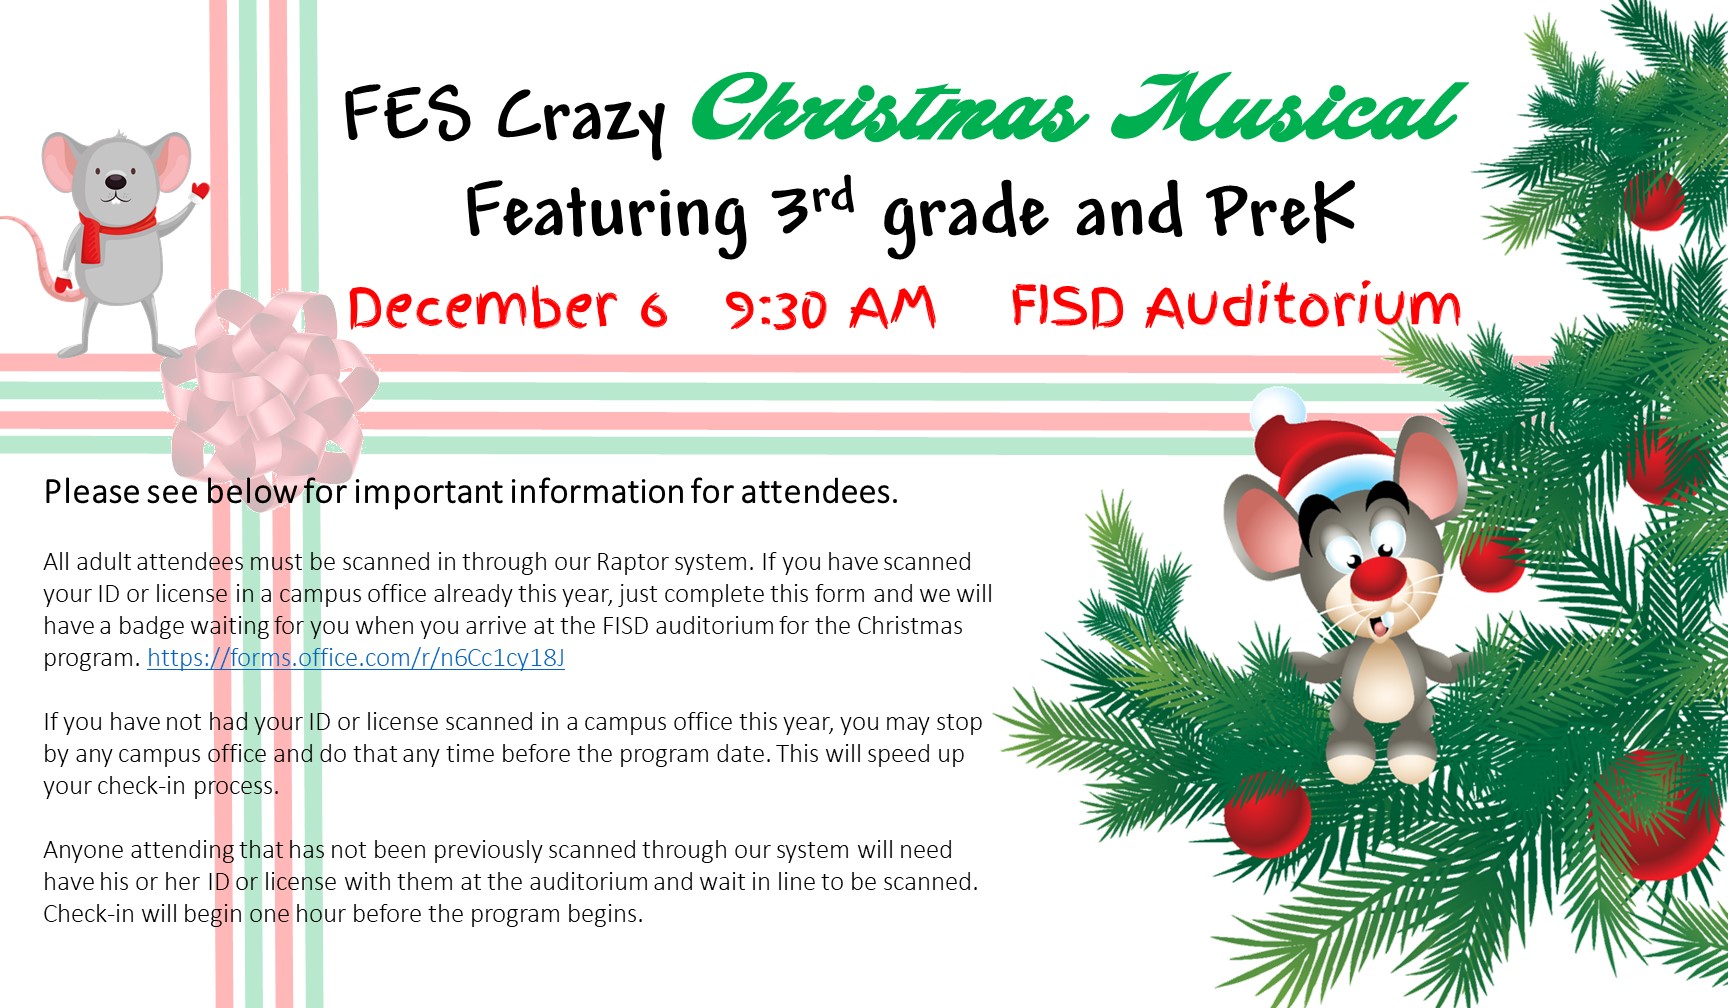 Christmas Musical December 6th at 9:30 AM